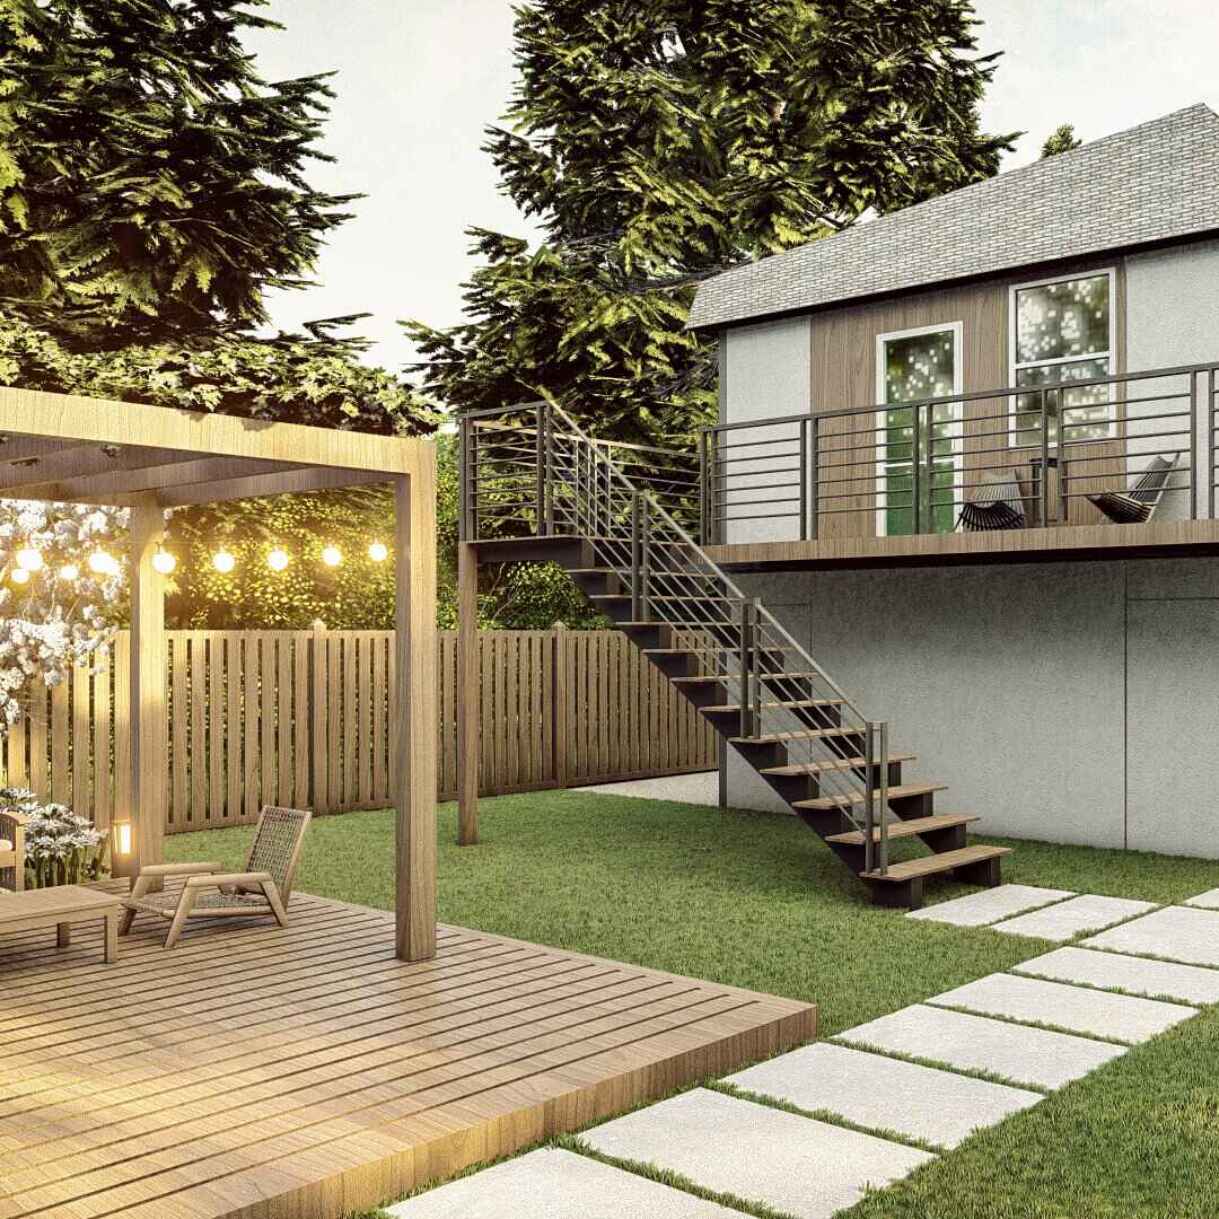 A stylish backyard featuring an elevated wooden deck with a pergola adorned with hanging lights, a metal staircase leading to a second-story entrance, surrounded by tall conifer trees and a neatly trimmed lawn with square stone stepping pads.